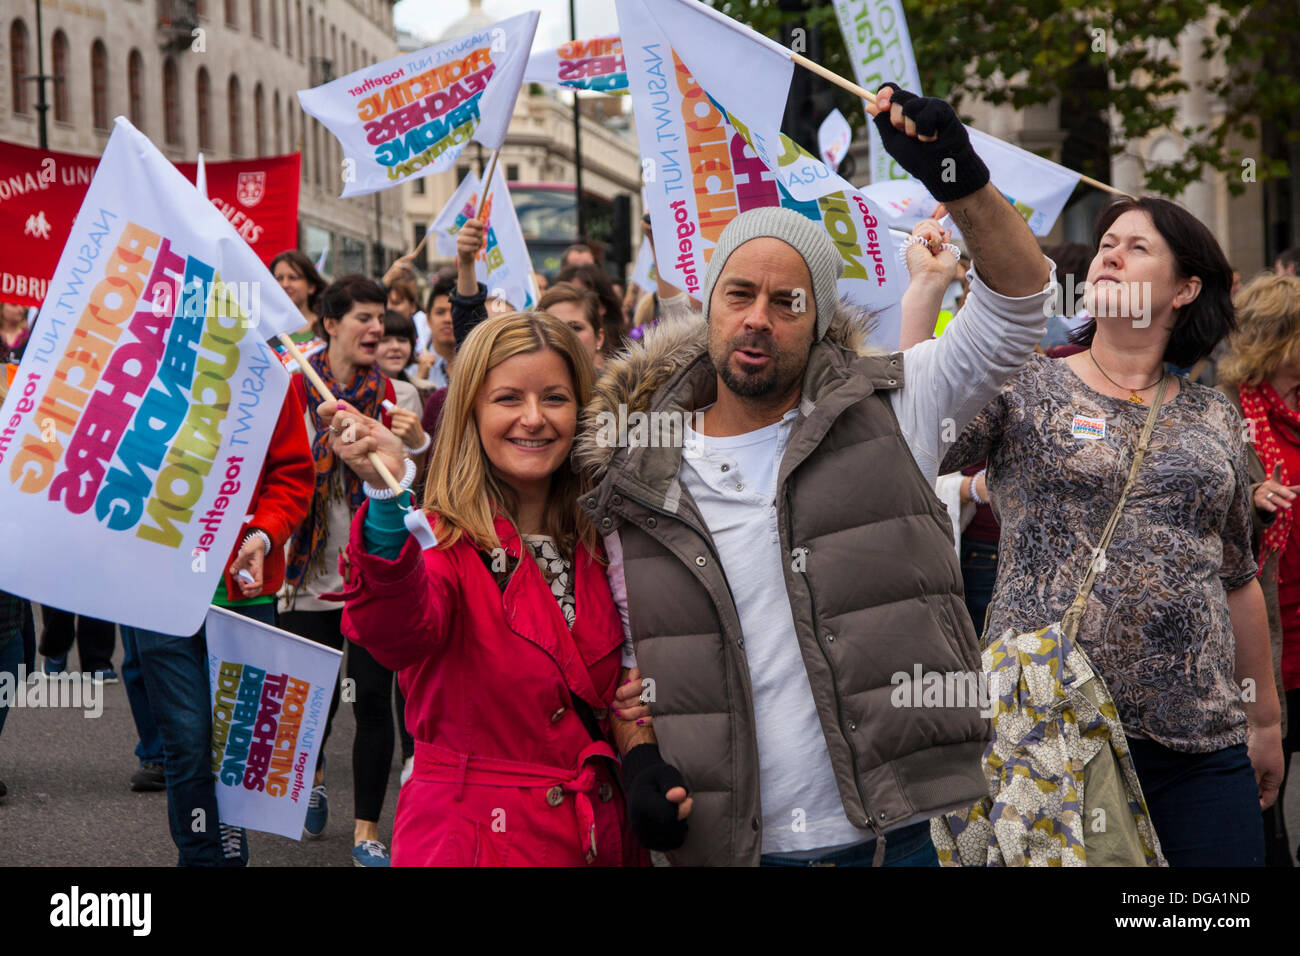 London, UK. 17th October 2013. Over 10,000 teachers from the NUT and NASUWT march through London in protest against changes to their pensions and Education Secretary Michael Gove's plans to increase their workloads. Credit:  Paul Davey/Alamy Live News Stock Photo